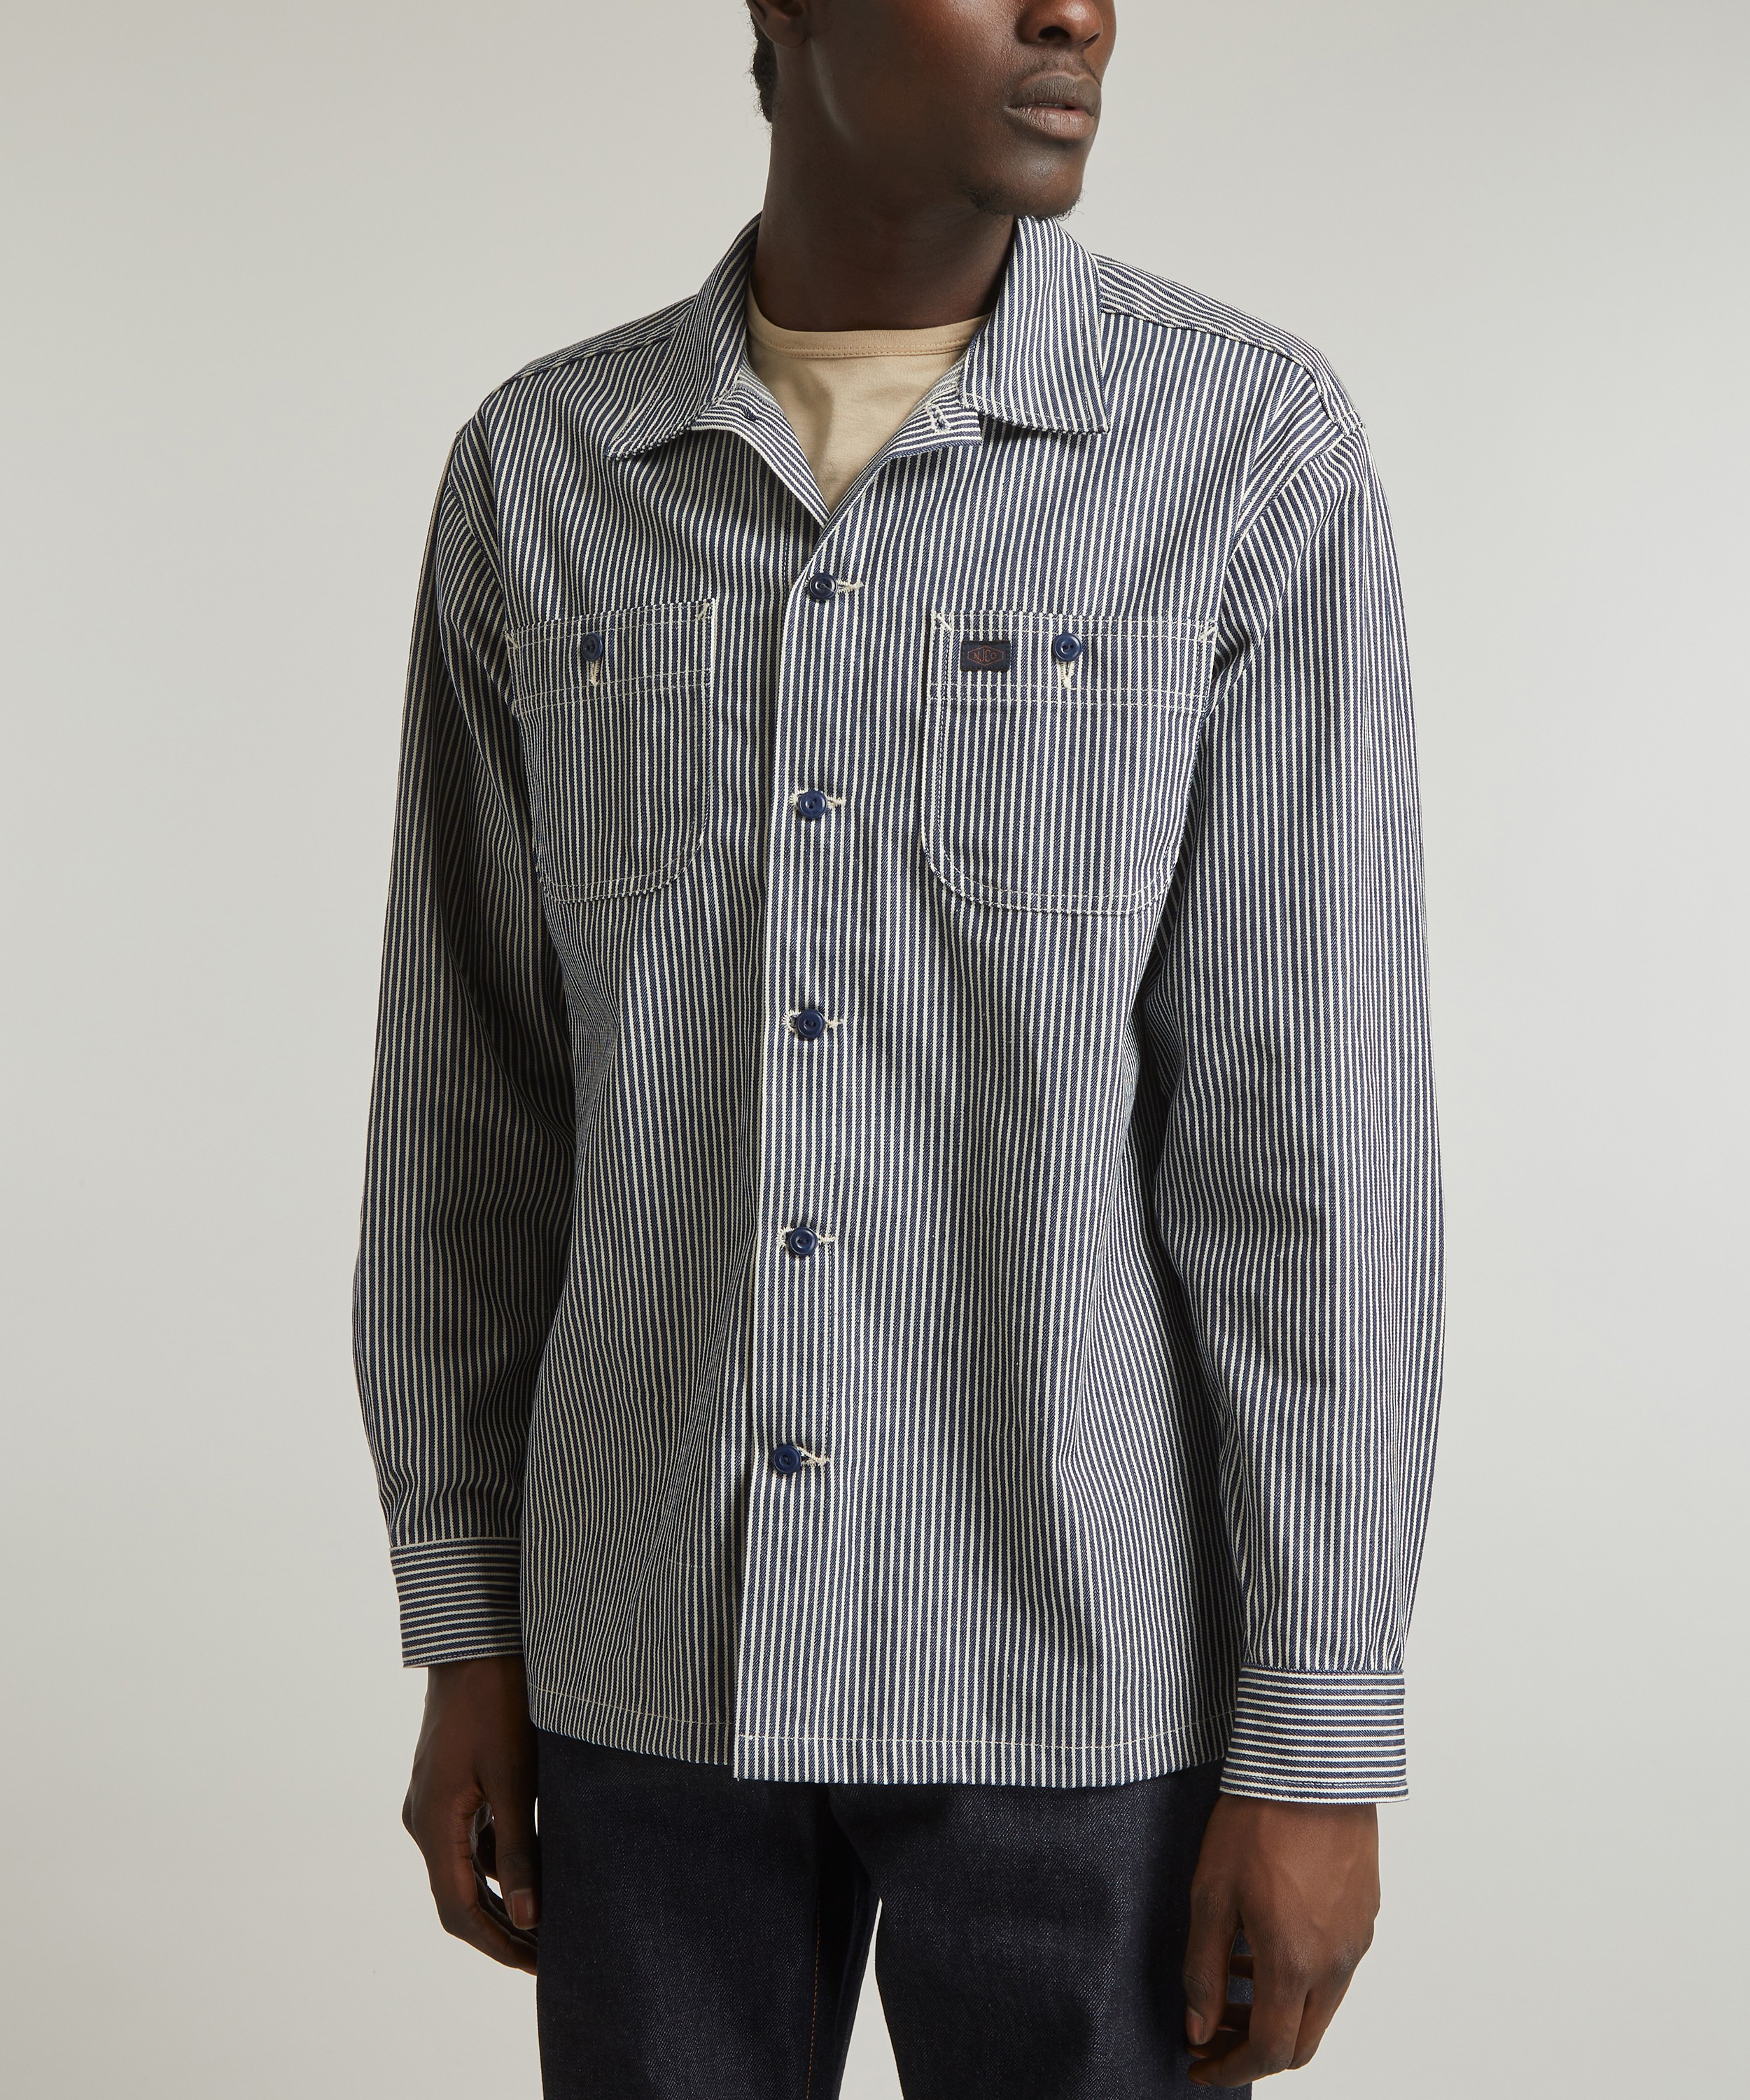 Nudie Jeans Vincent Hickory Stripe Shirt | Liberty